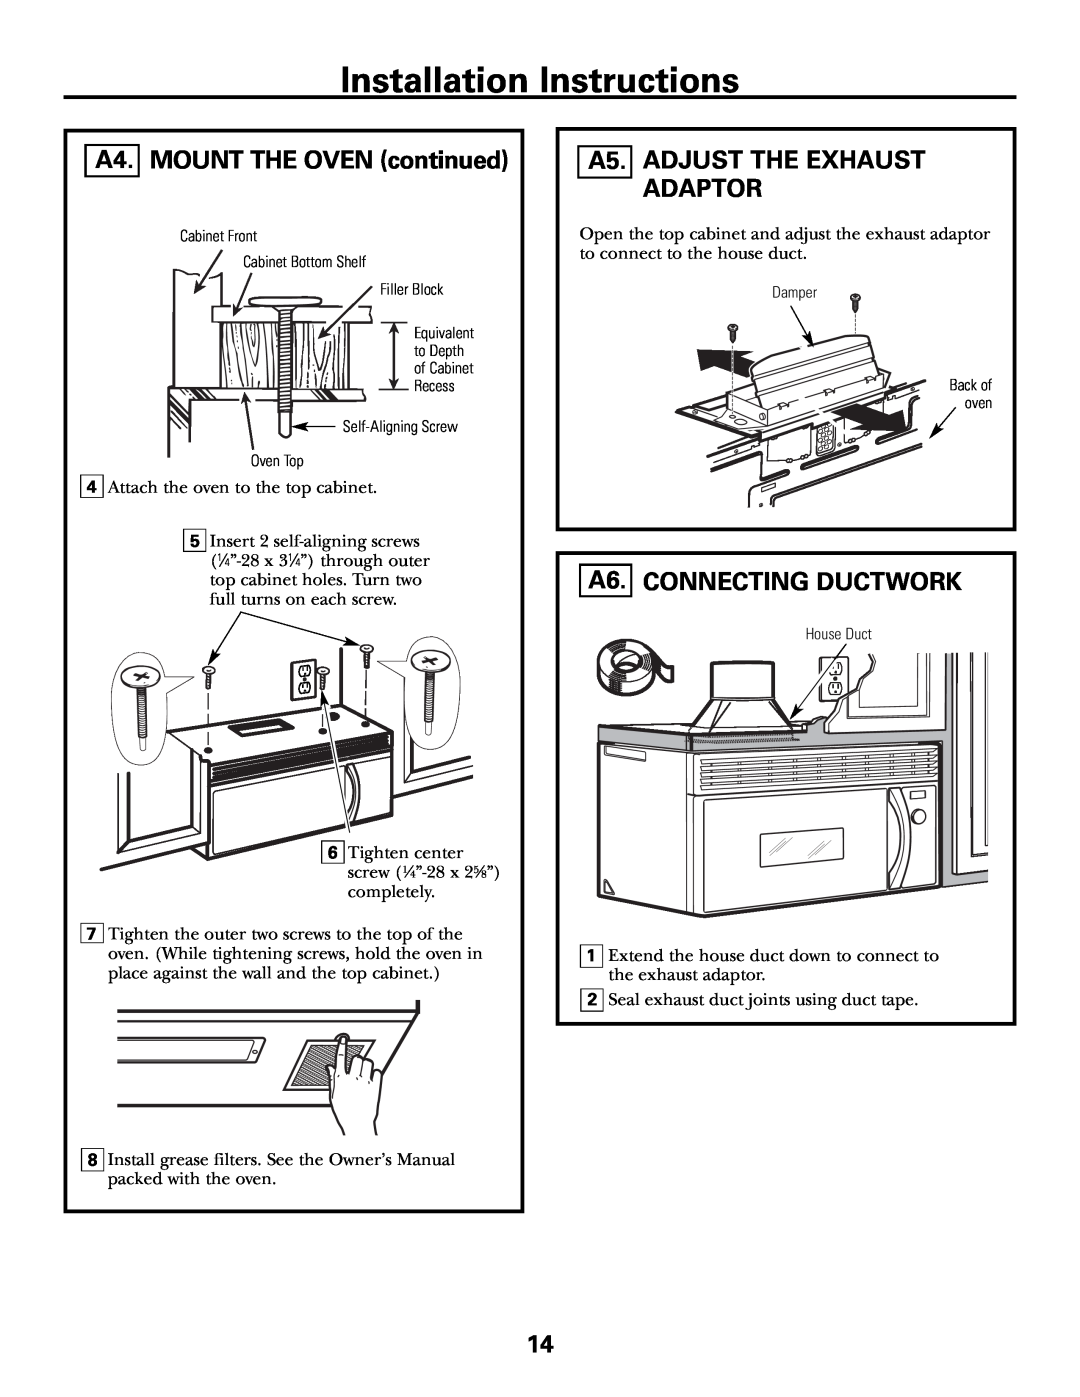 GE JVM1790 installation instructions A4. MOUNT THE OVEN continued, A5. ADJUST THE EXHAUST ADAPTOR, A6. CONNECTING DUCTWORK 